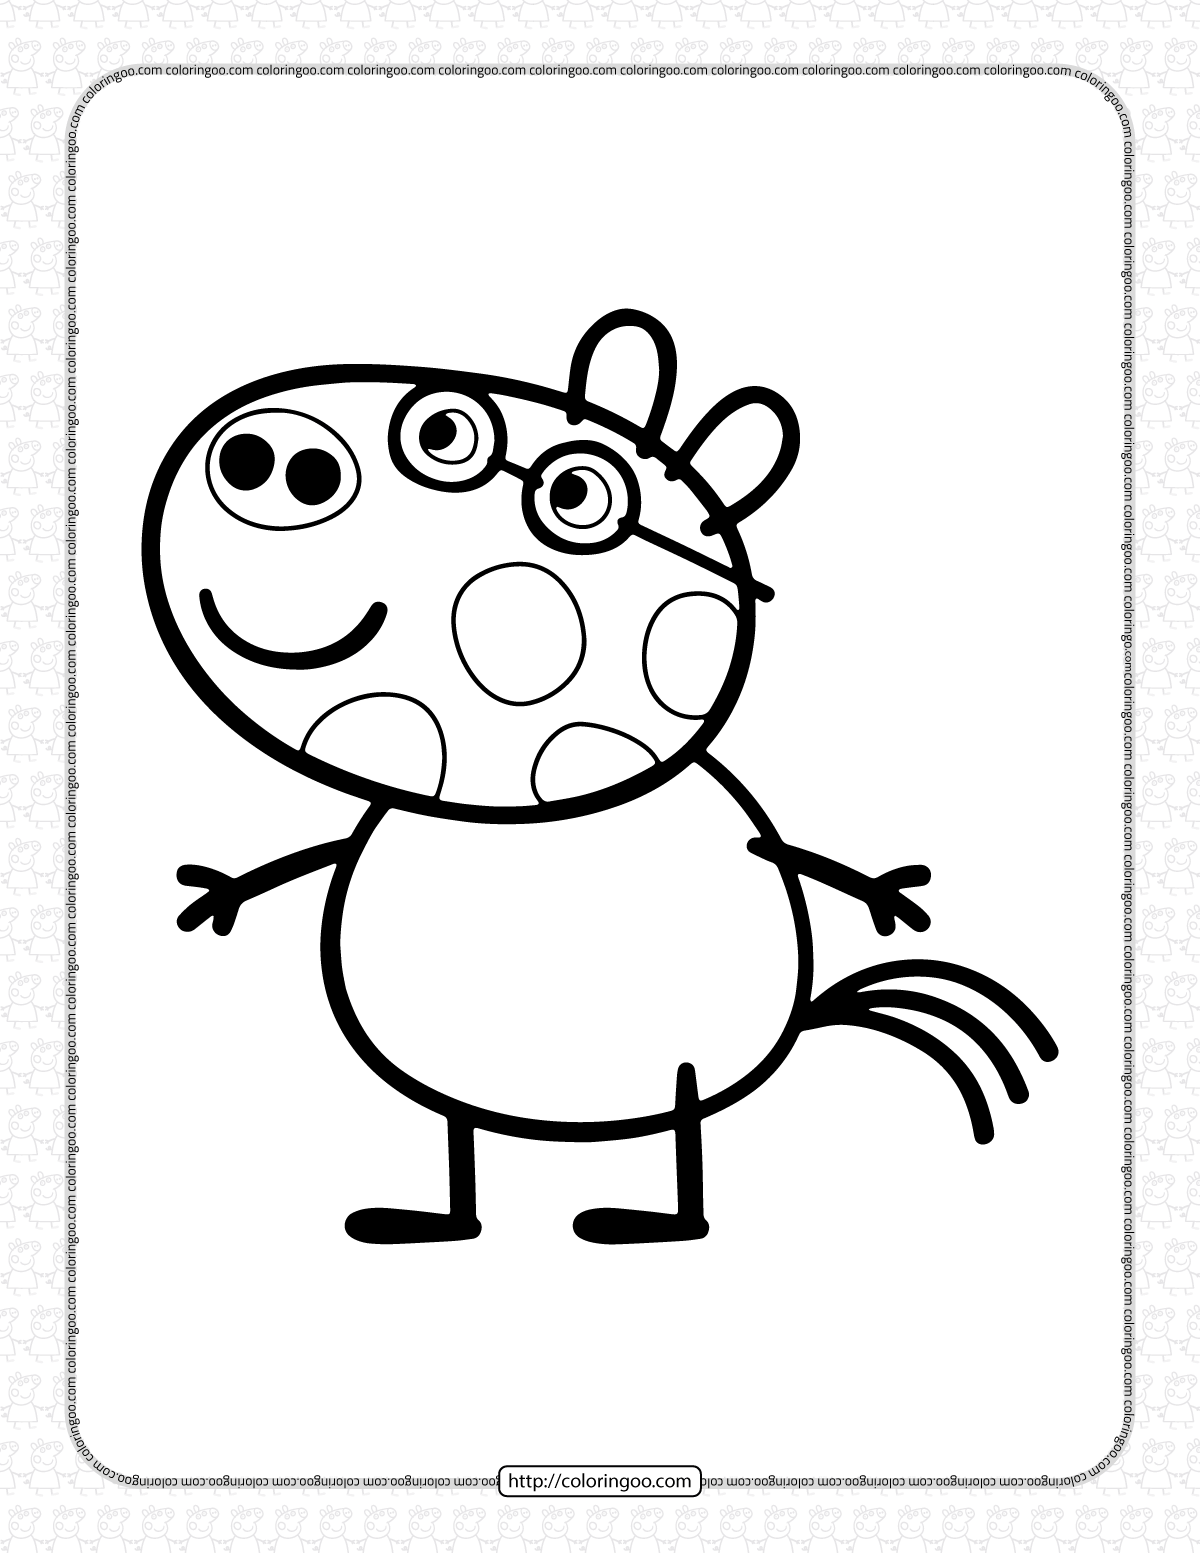 pedro pony in peppa pig coloring pages